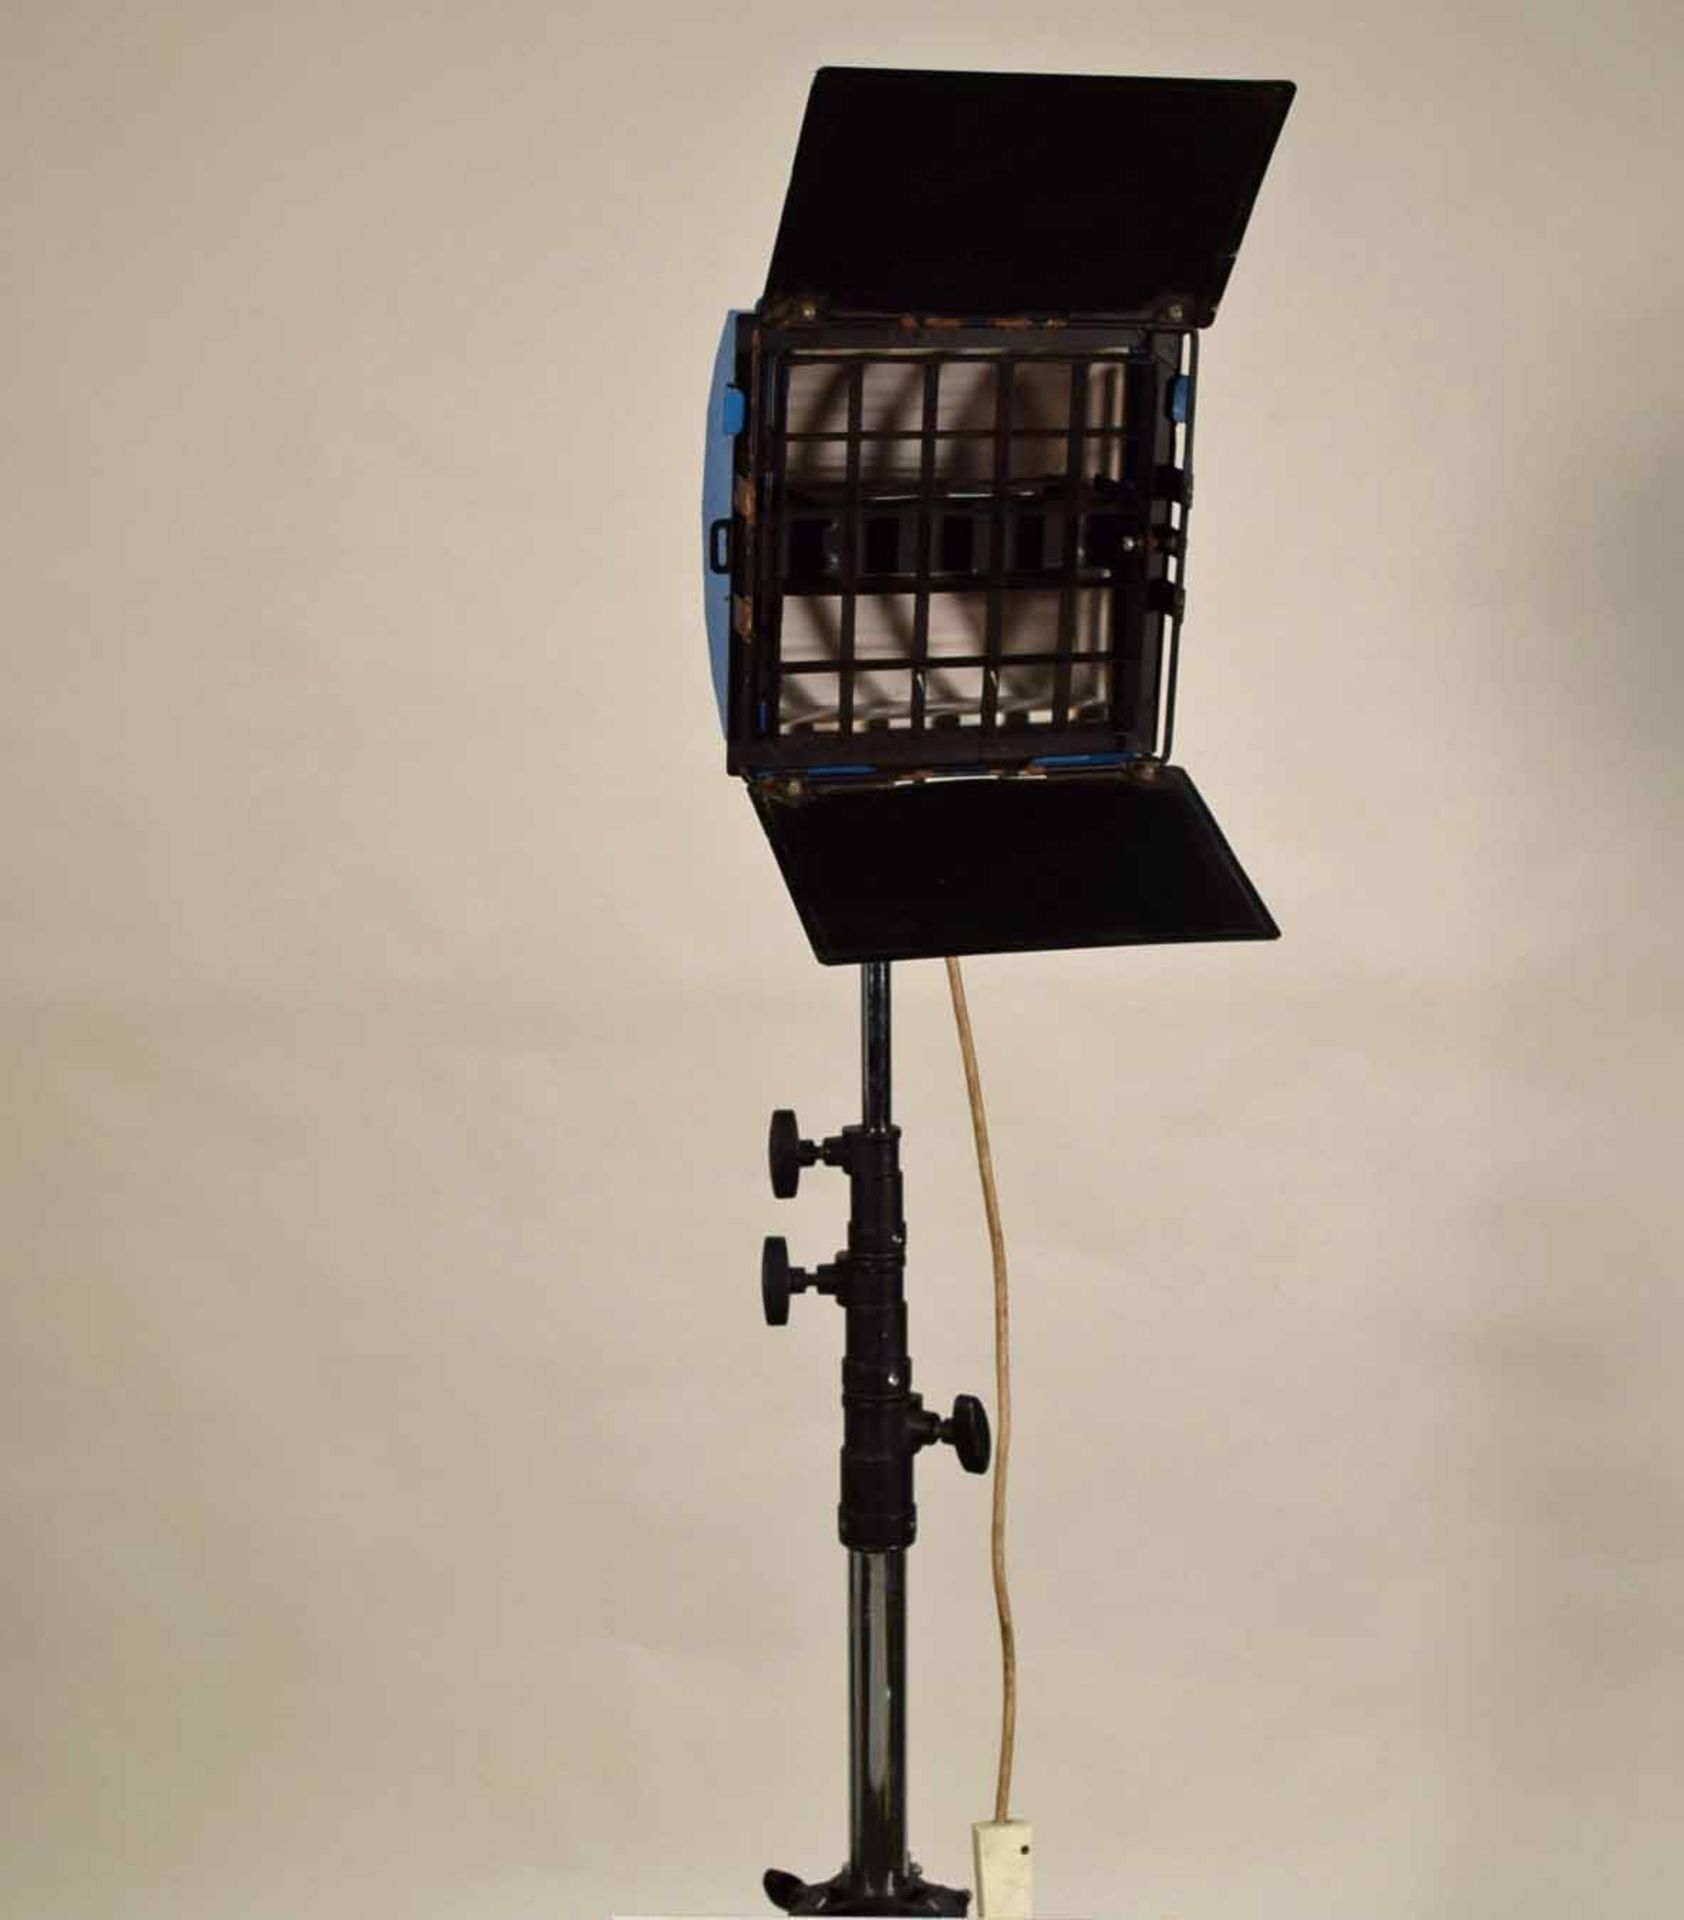 A BALANCROFT 1000W Light with Egg Box Diffuser and Gel Frame